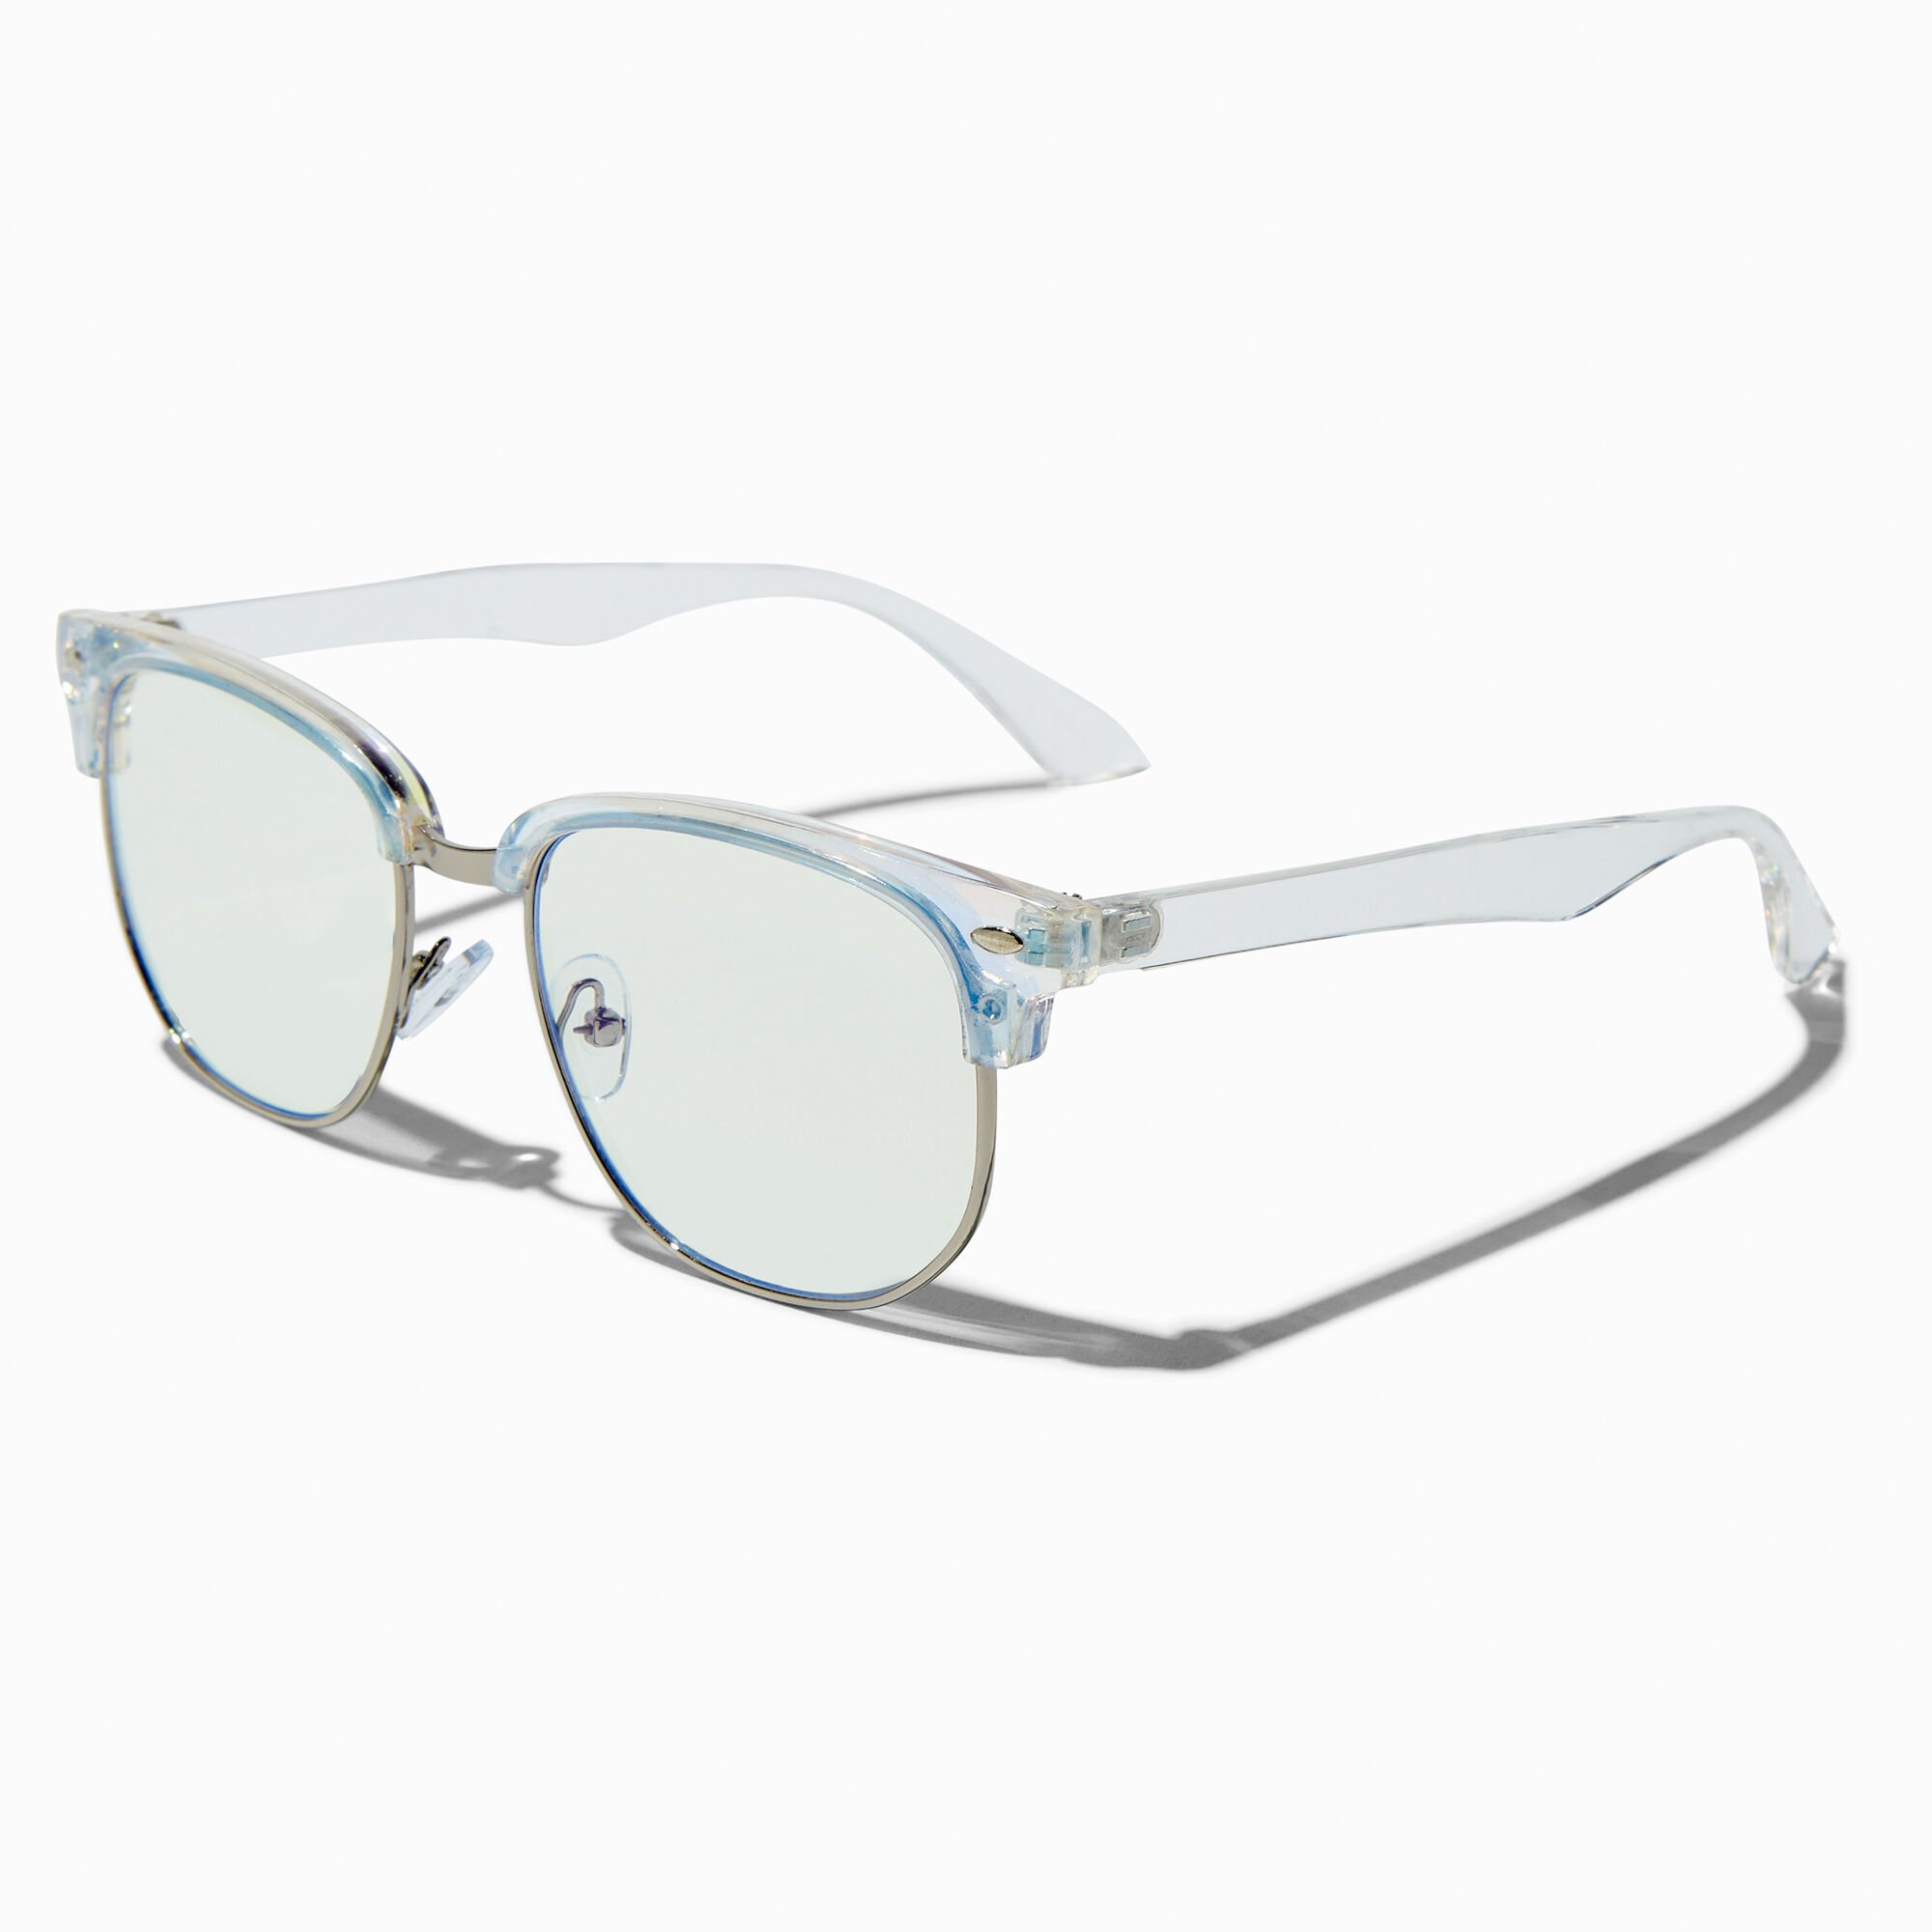 View Claires Solar Blue Light Reducing Clear Lens Frames  information